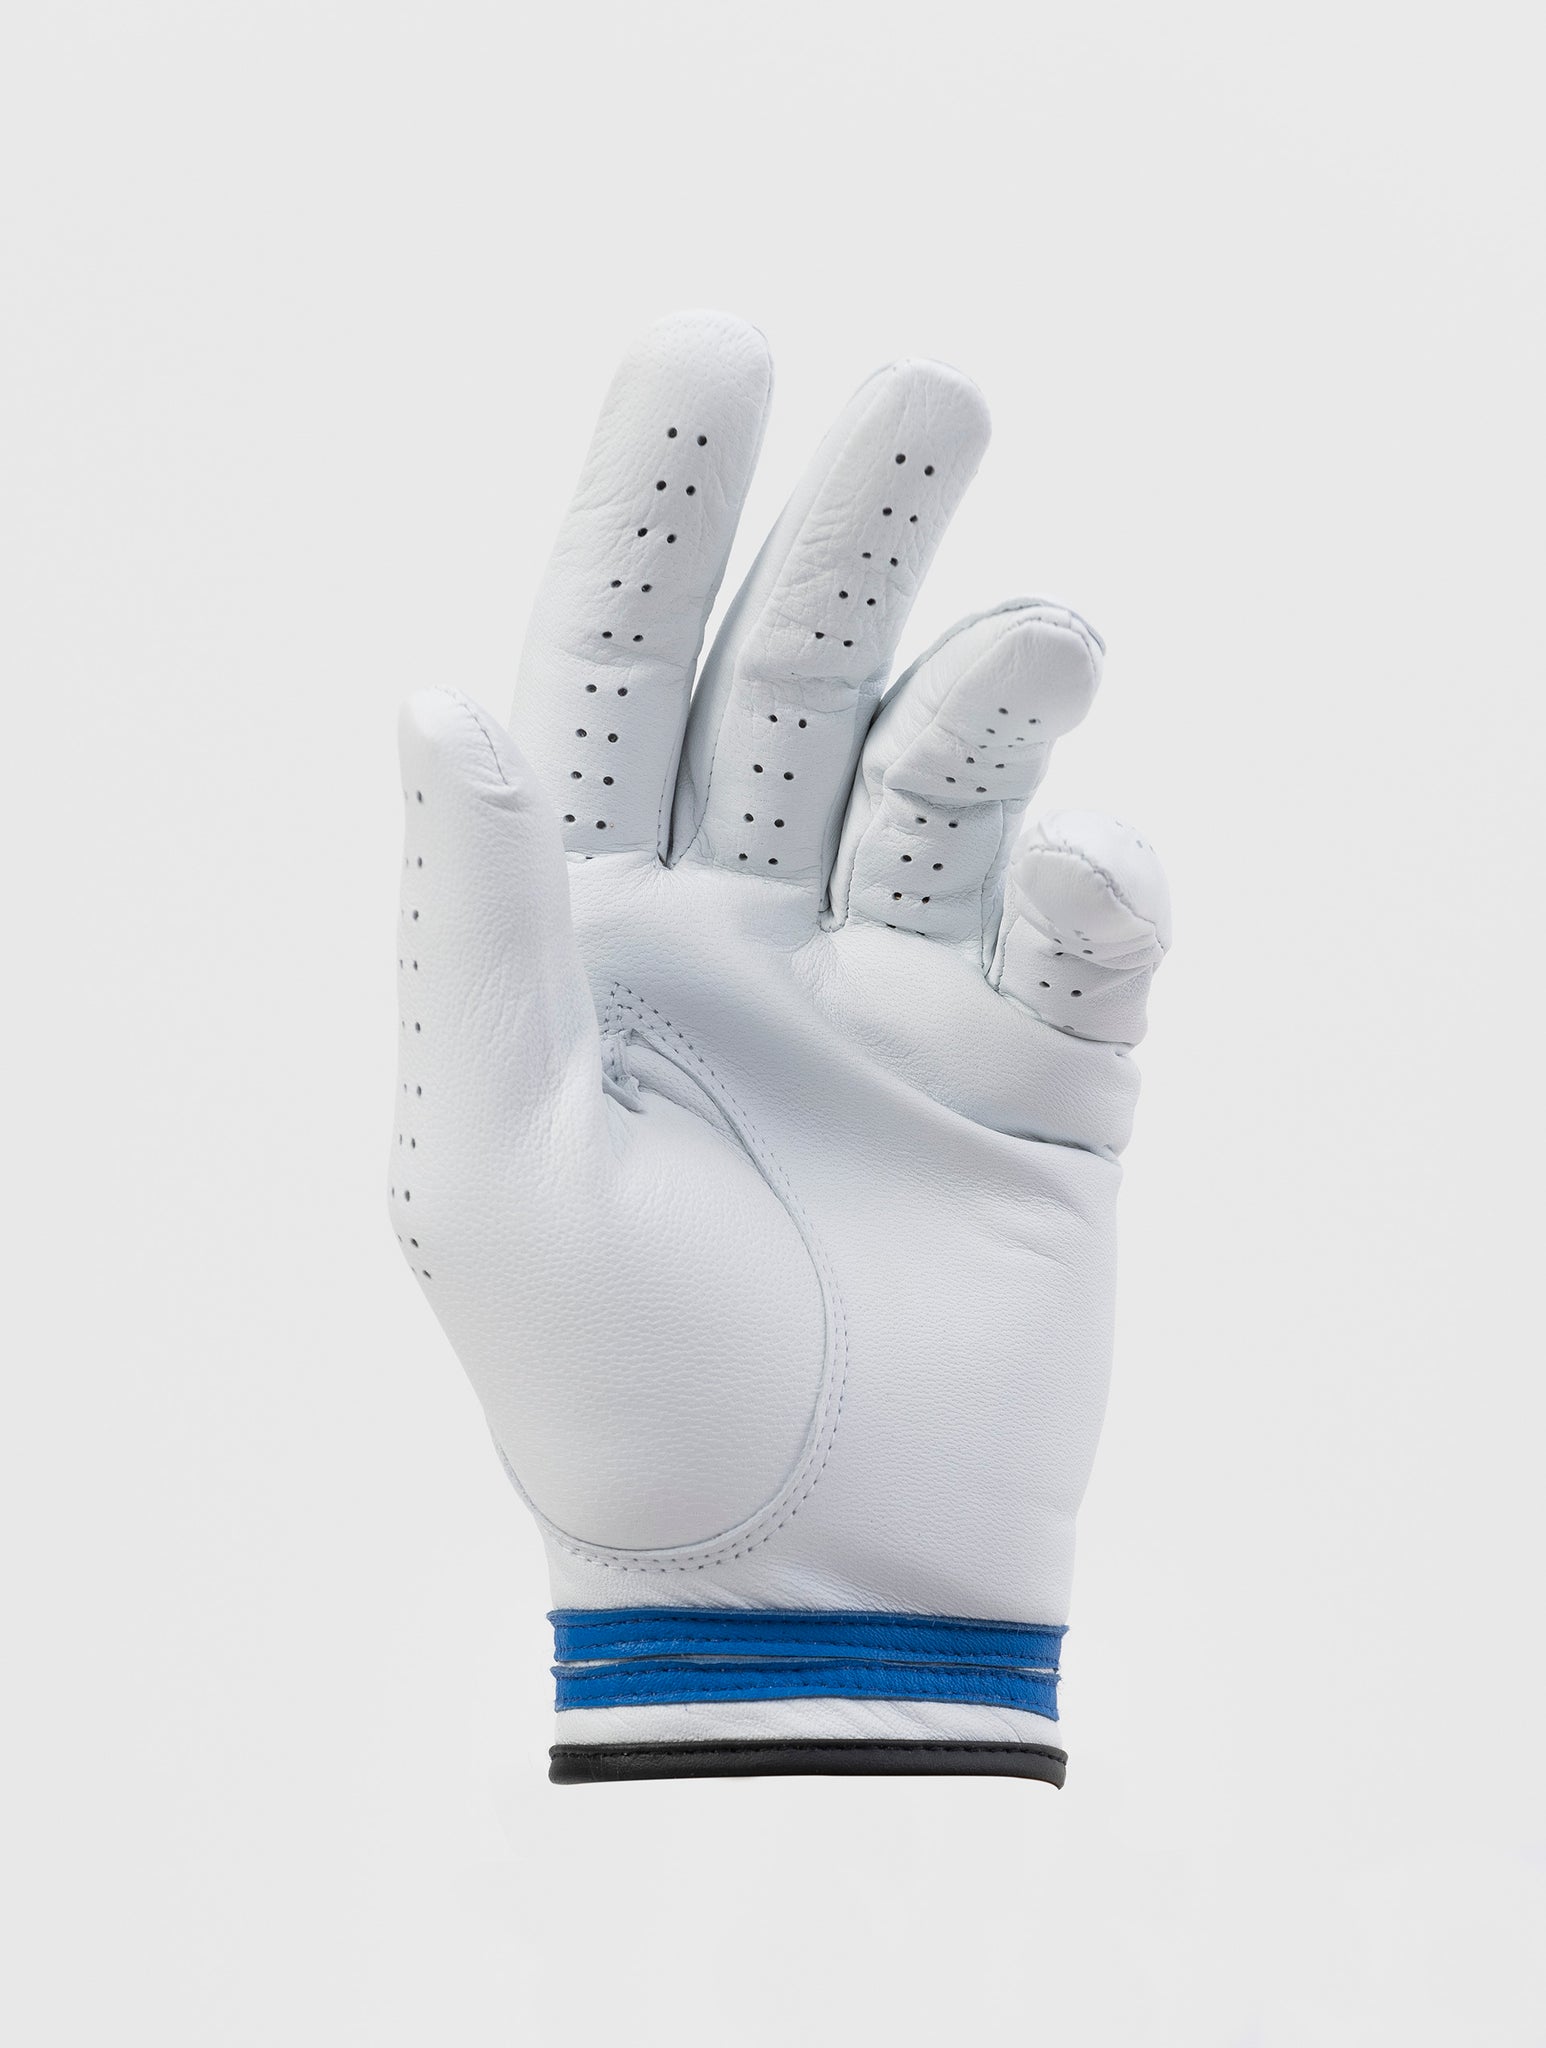 NOHOW GOLF LEFT GLOVE IN WHITE AND BLUE